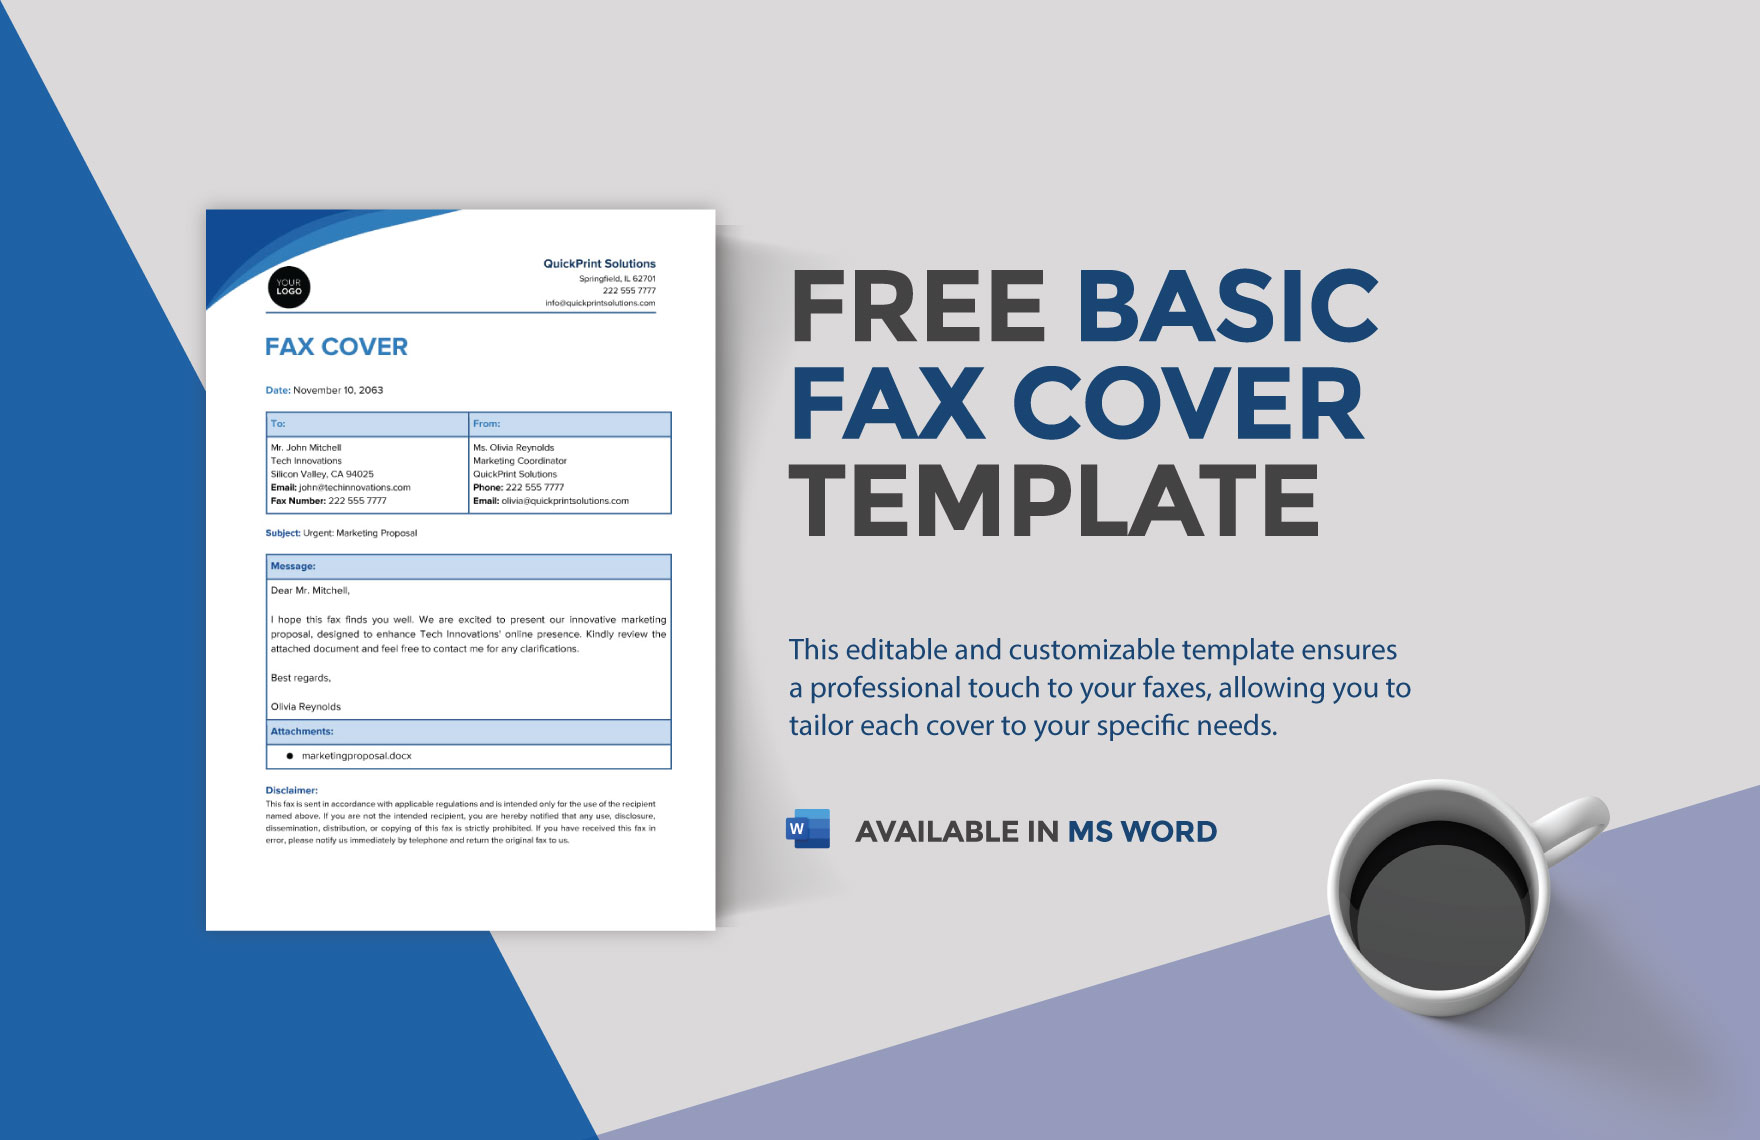 Basic Fax Cover Template